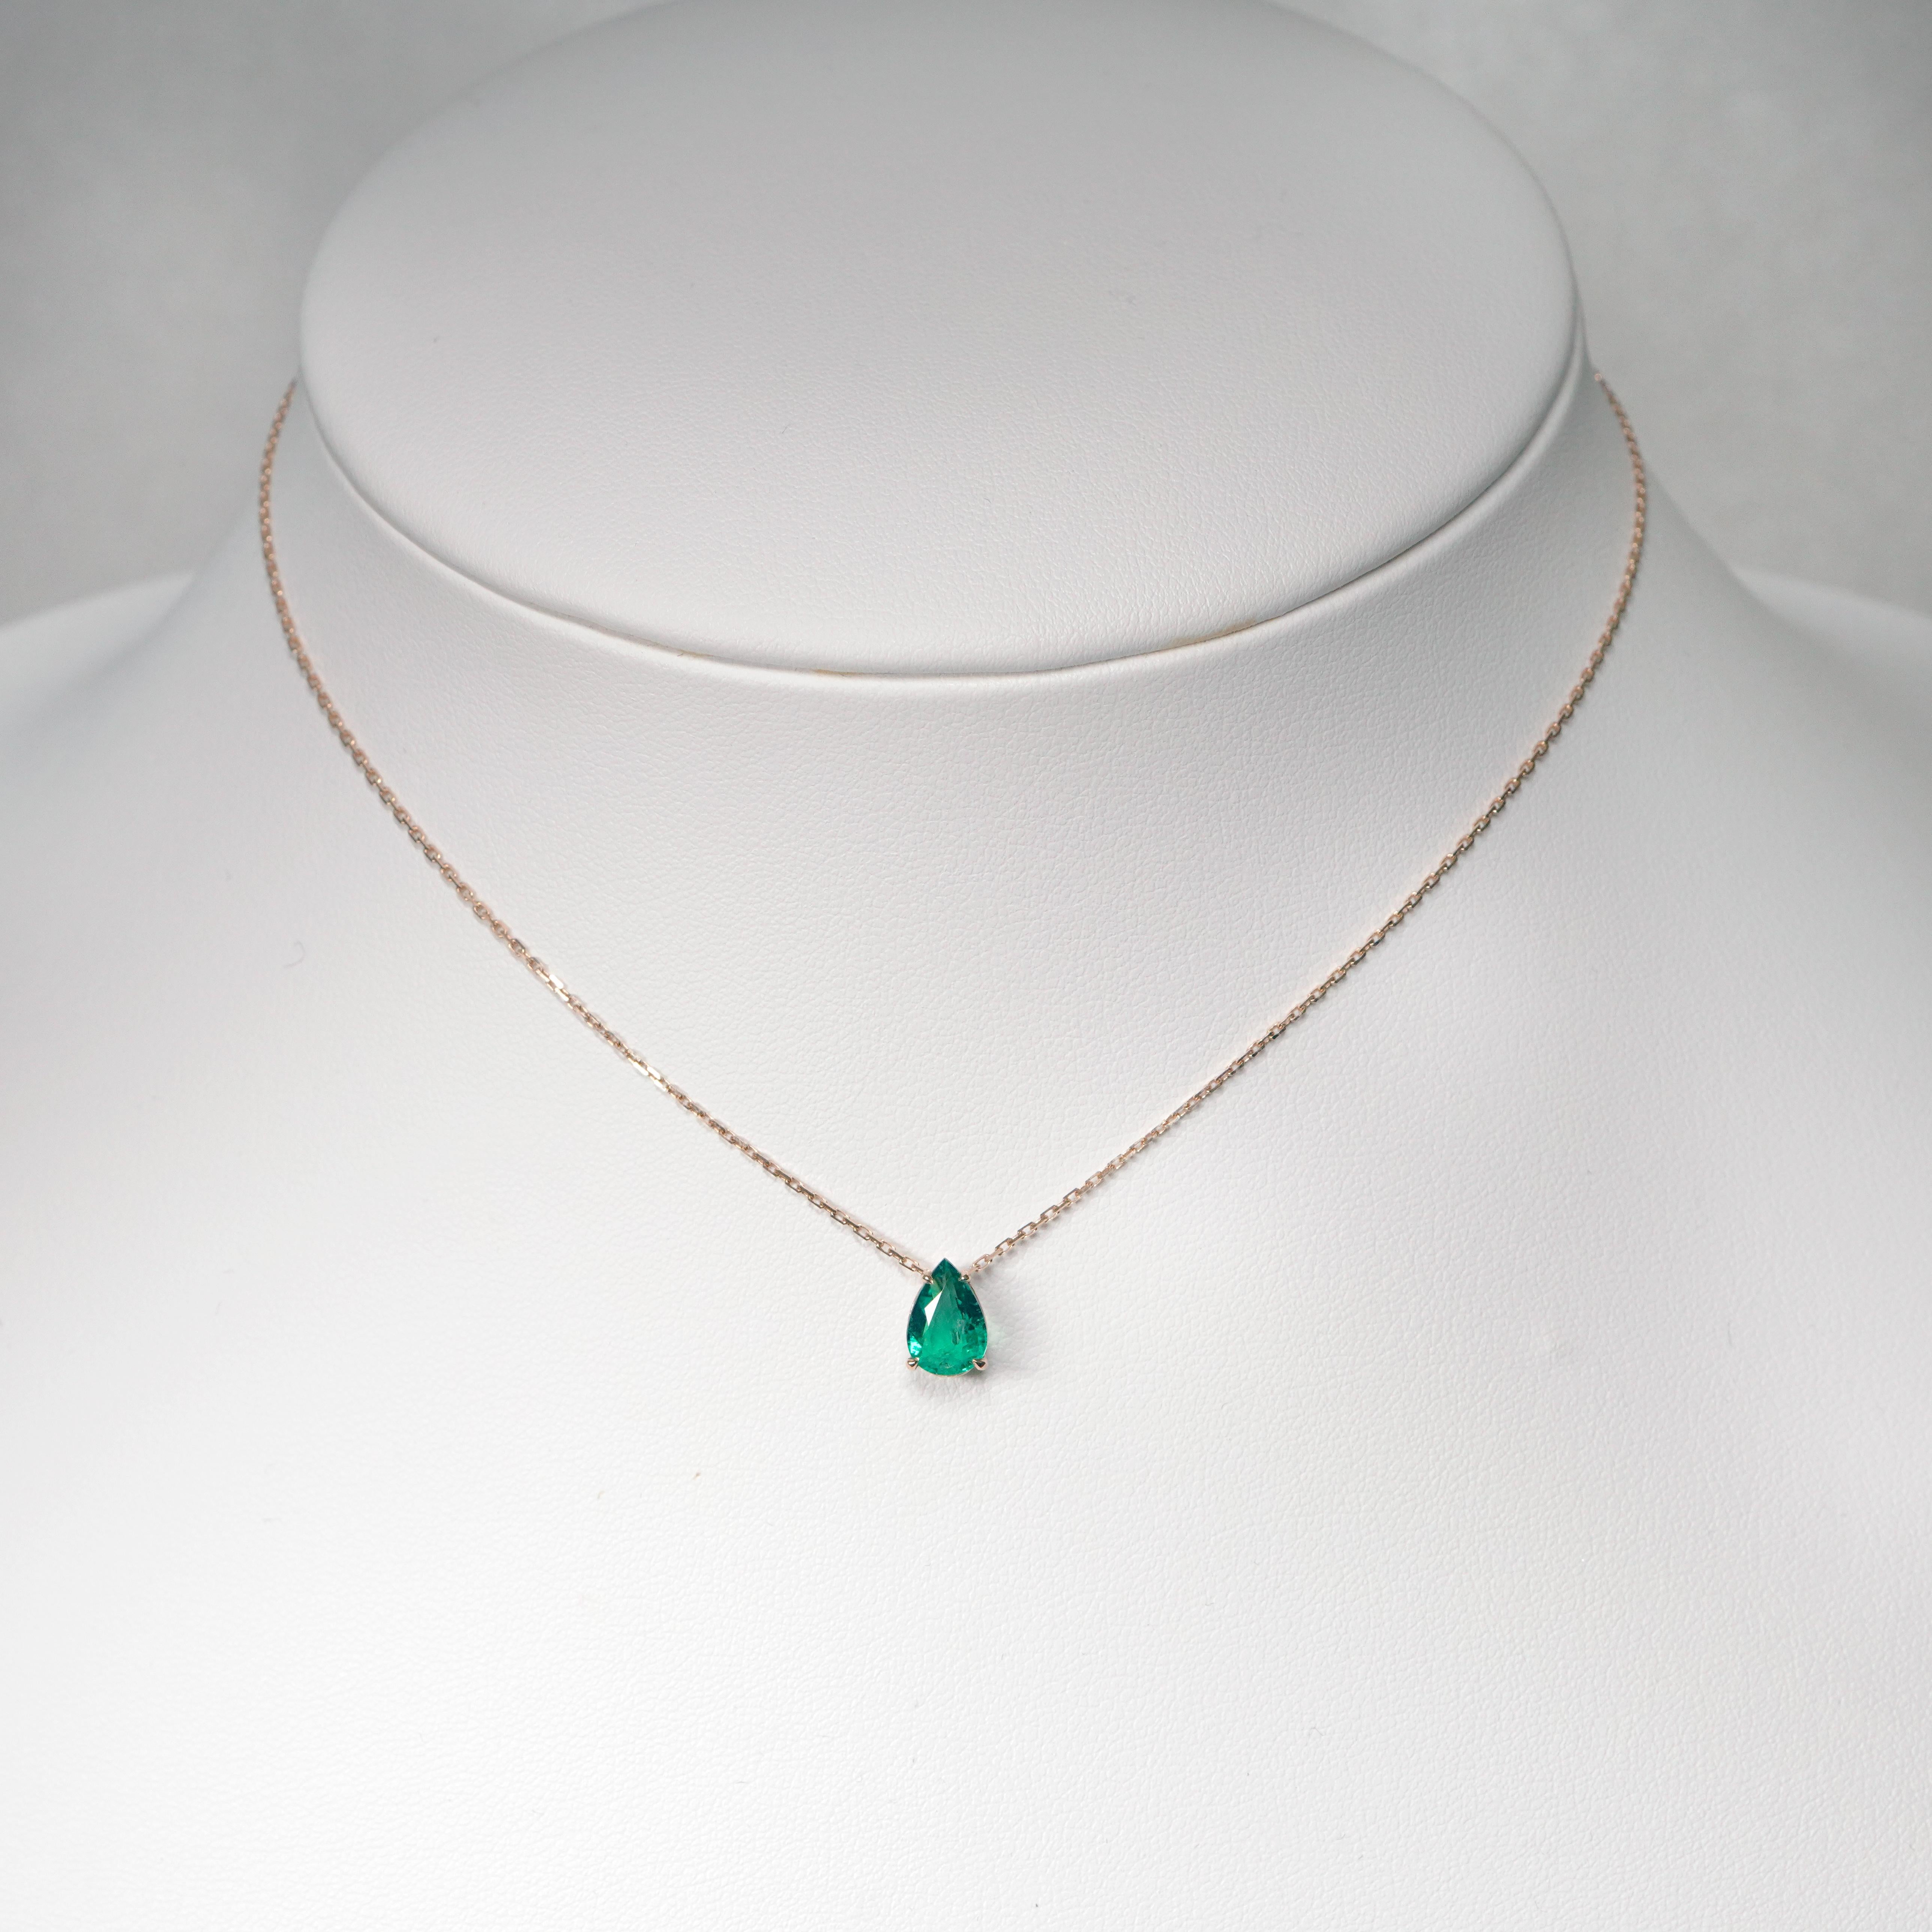 18K Yellow Gold Necklaces With Emerald 1.26 ct. For Sale